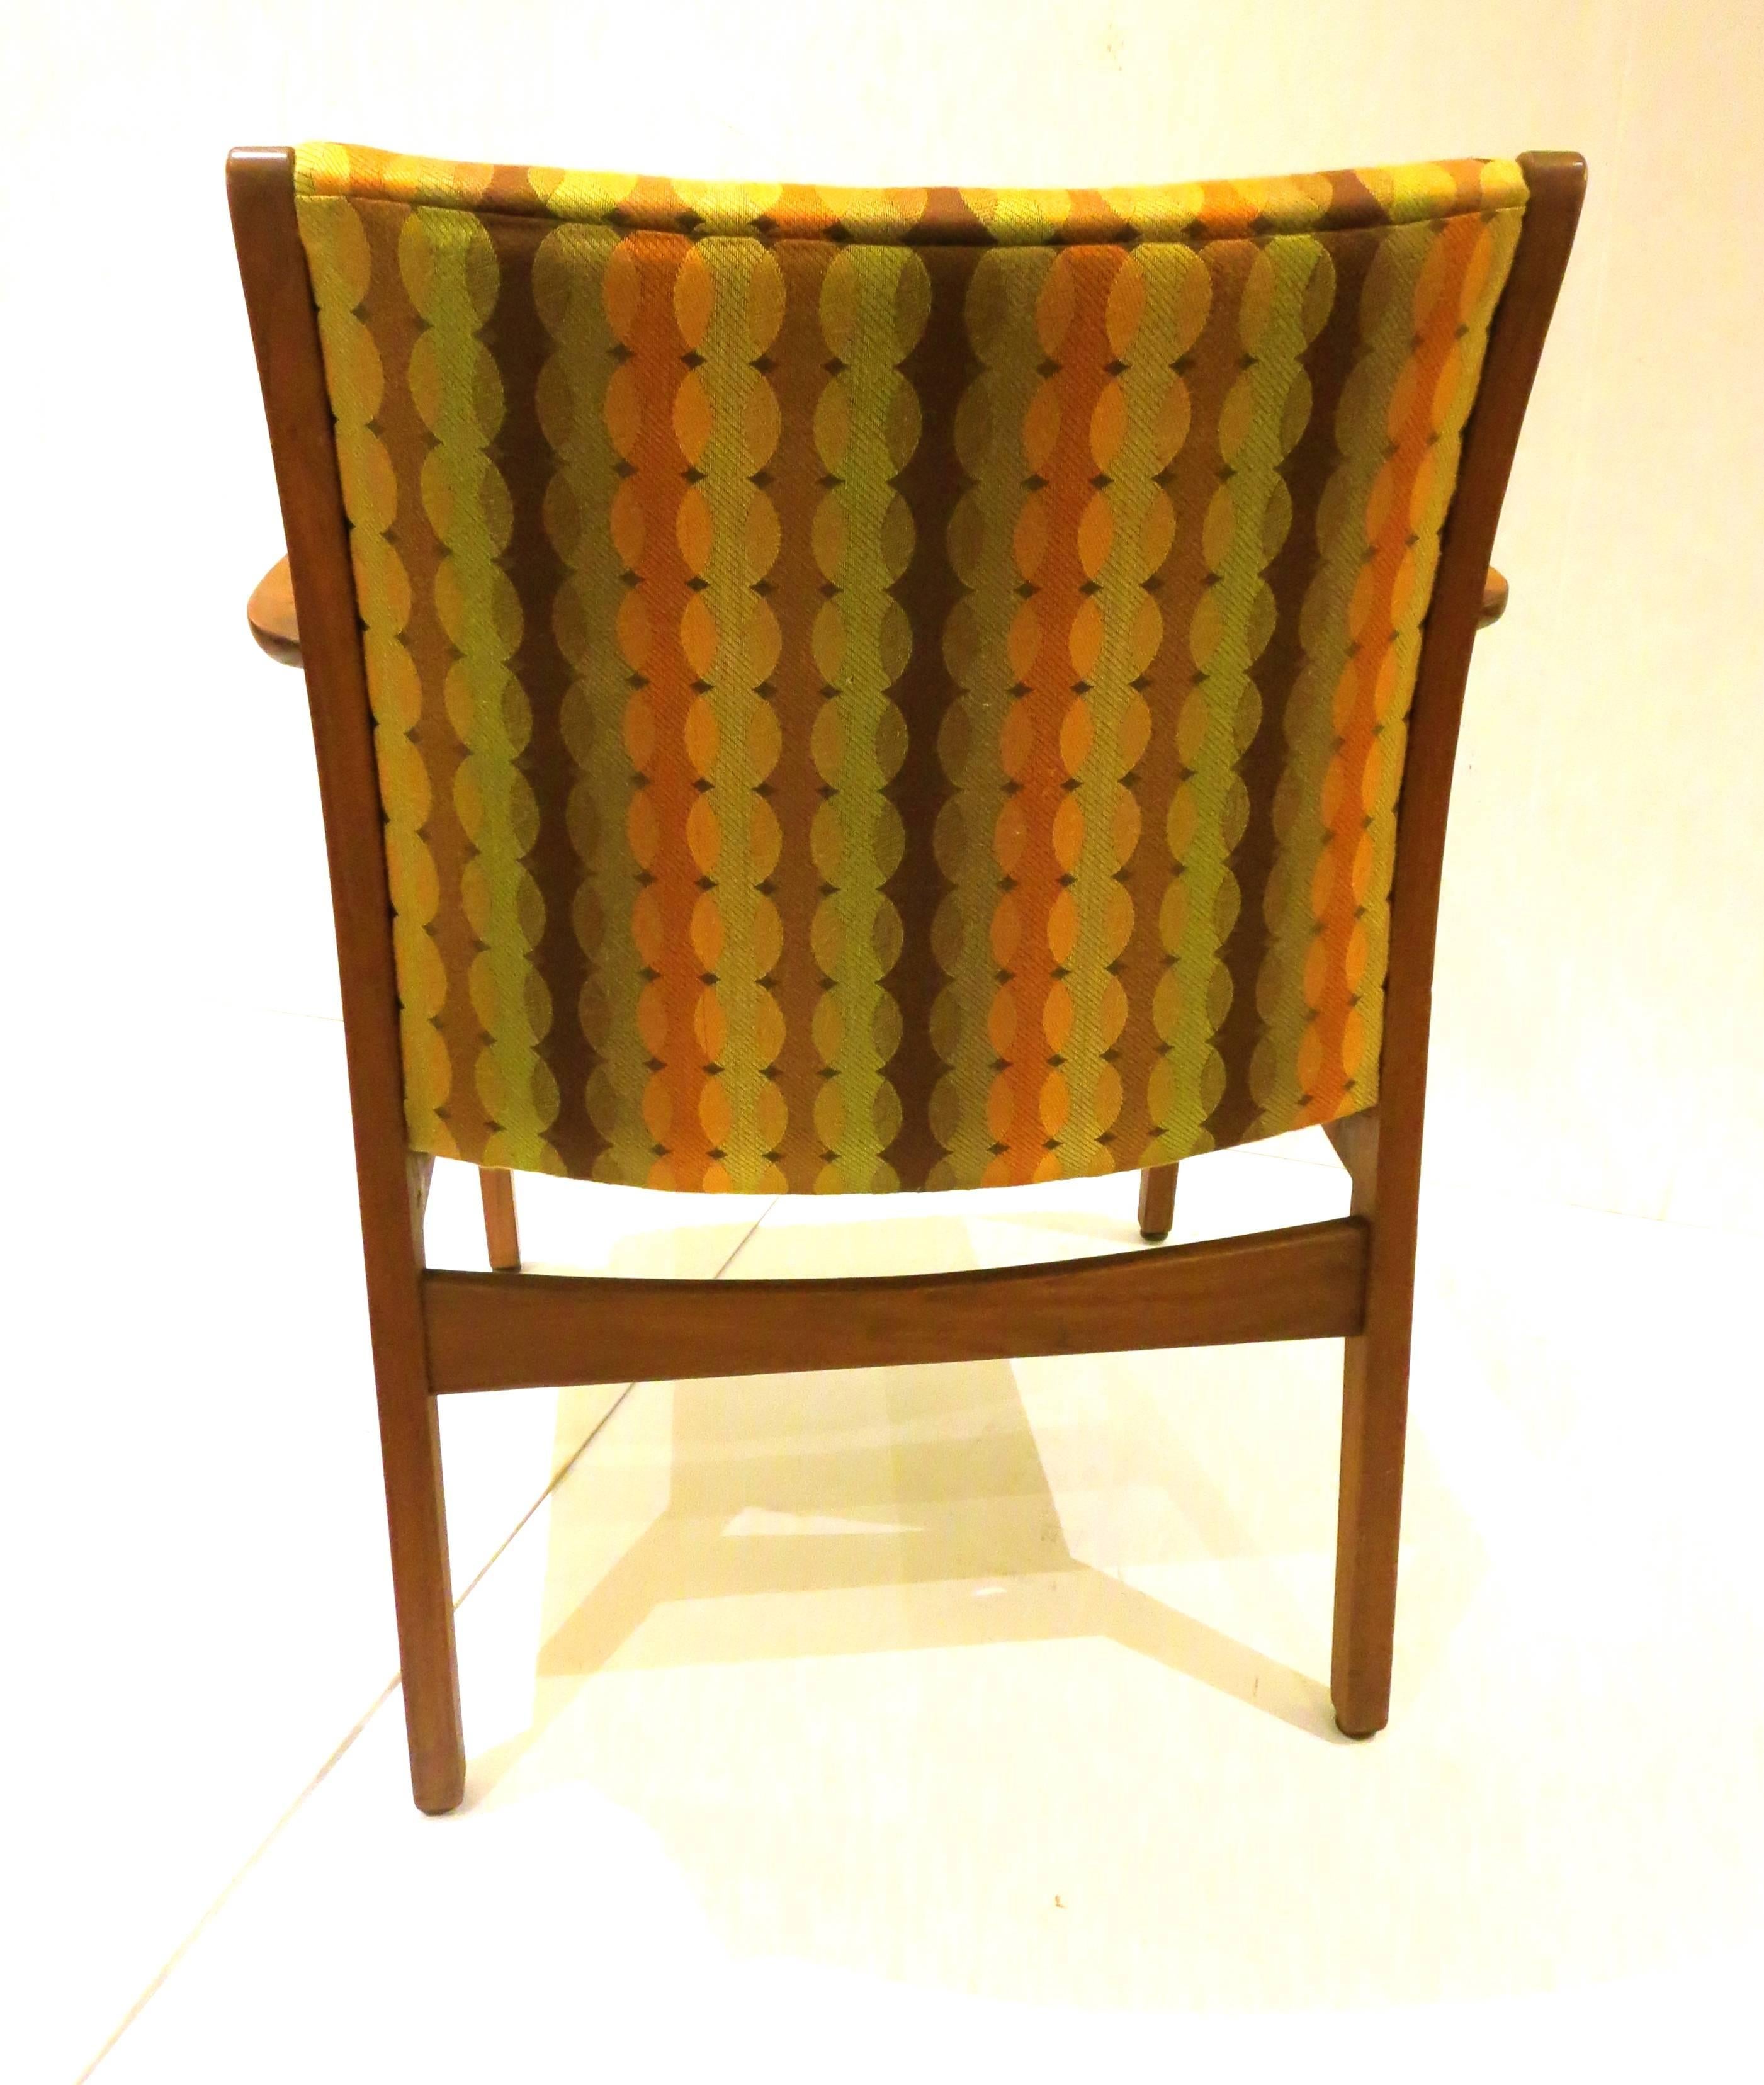 Beautiful elegant armchair American modern, circa 1950s, professionally refinished and recover with Knoll fabric, solid and sturdy, great lines and design, nice and comfy. Measures: 25